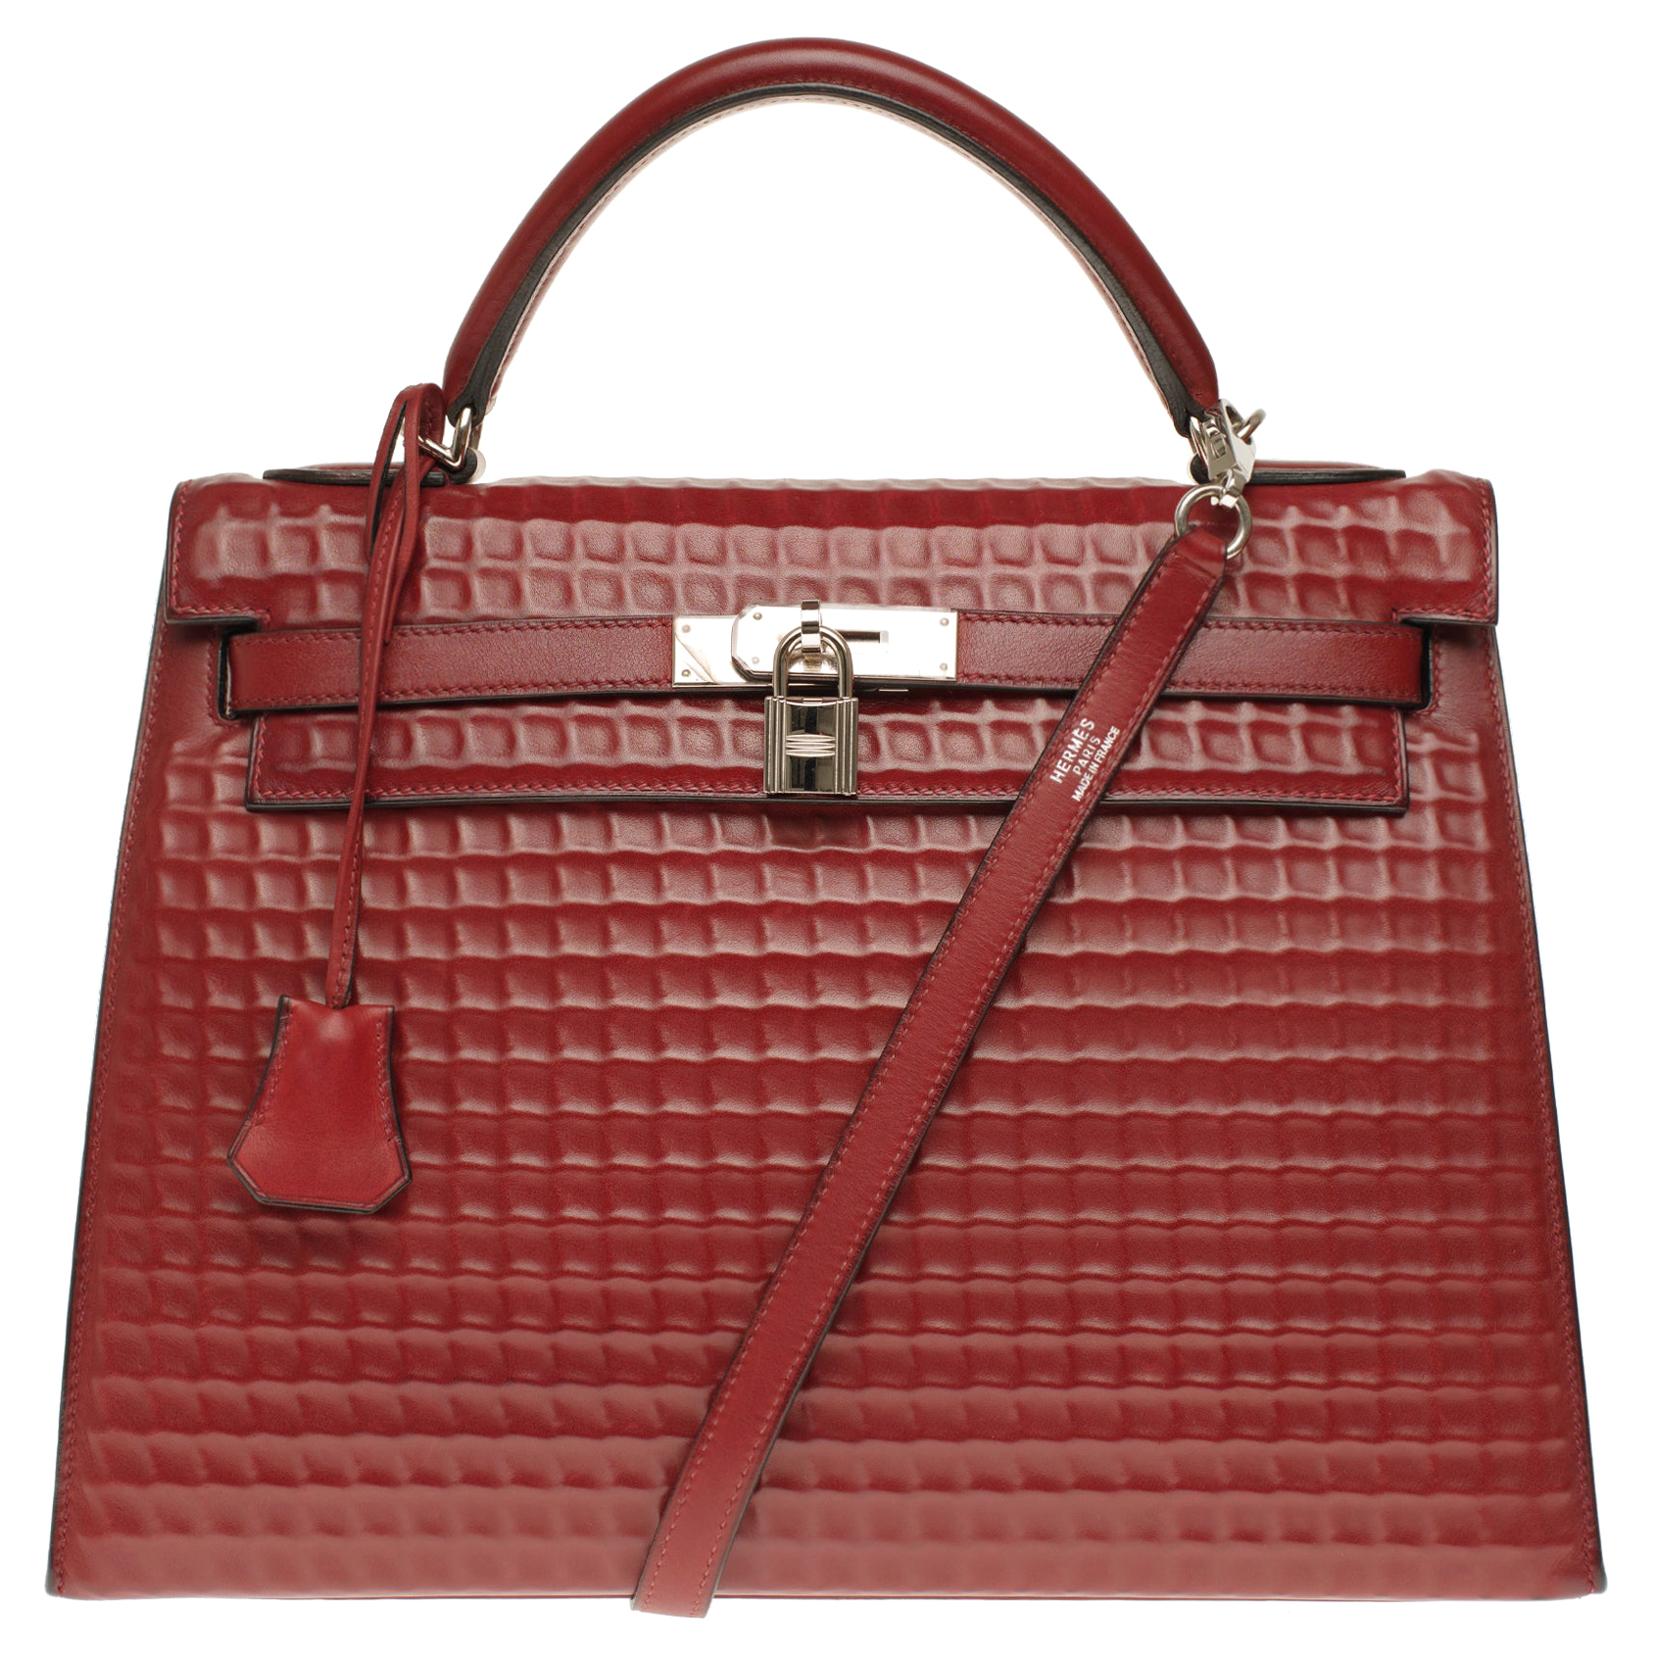 ULTRA RARE-COLLECTIBLE-Hermès Kelly 32 Waffle with strap in rouge H Barenia, PHW